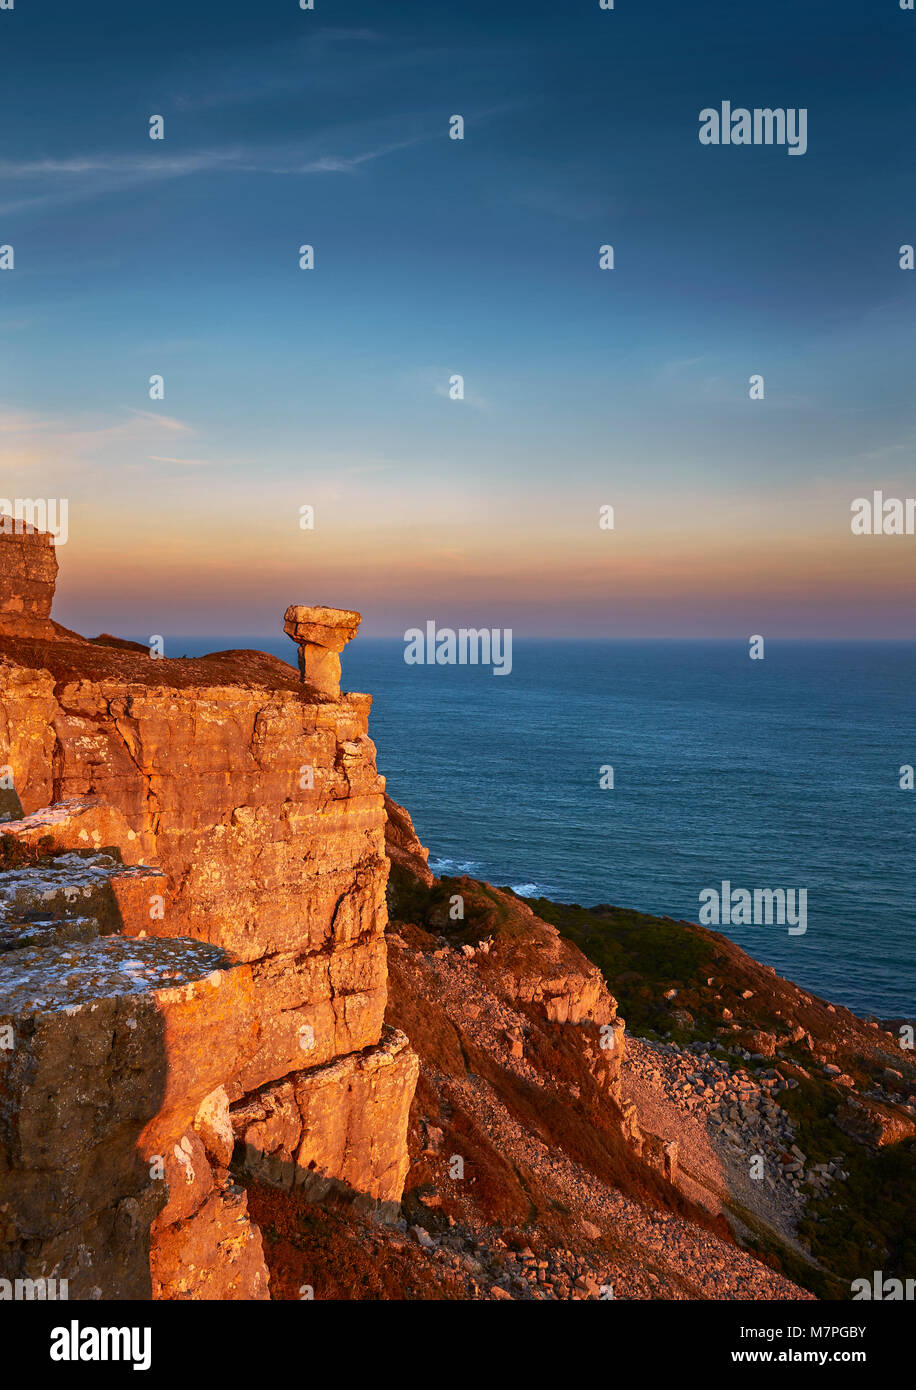 St Aldhelms head at sunset with a sprinkle of snow covering the rocks, Worth Matravers, Swanage, Dorset, England, United Kingdom, Great Britain, UK Stock Photo